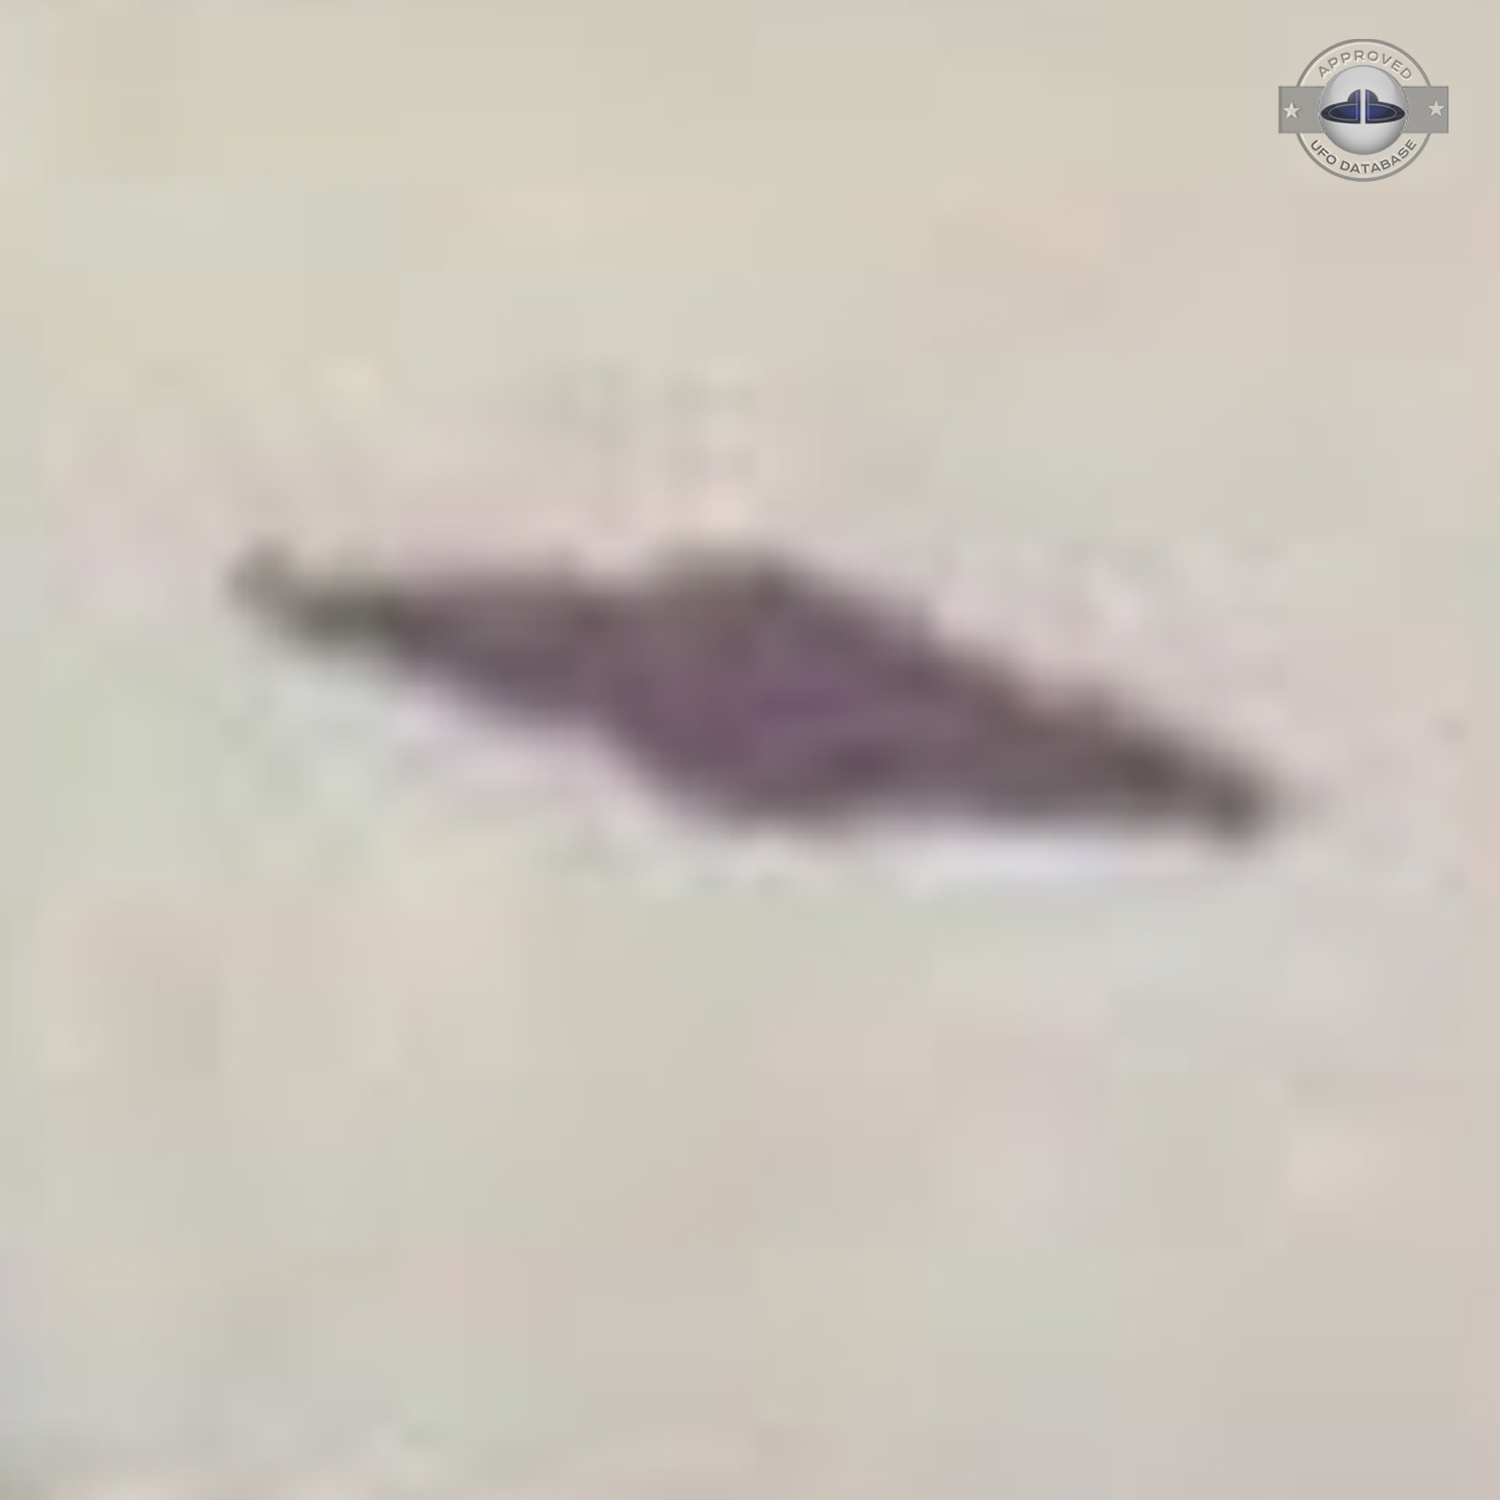 Ufo picture taken by Amaury Rivera who says that he was abducted also UFO Picture #68-7